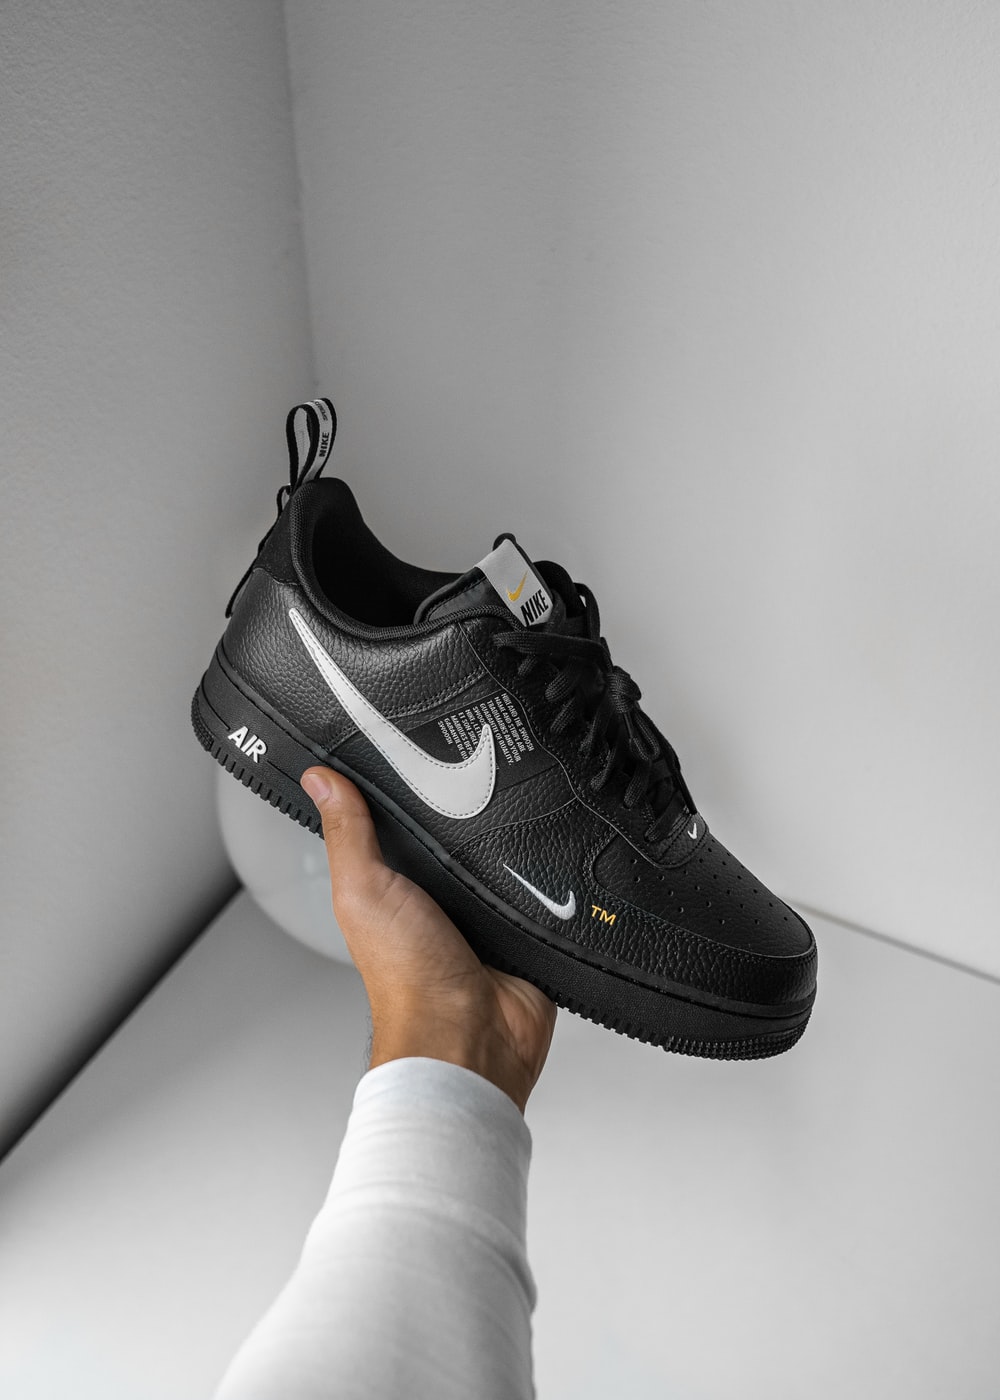 black and white Nike Air Force sneaker photo Free Shoe Image